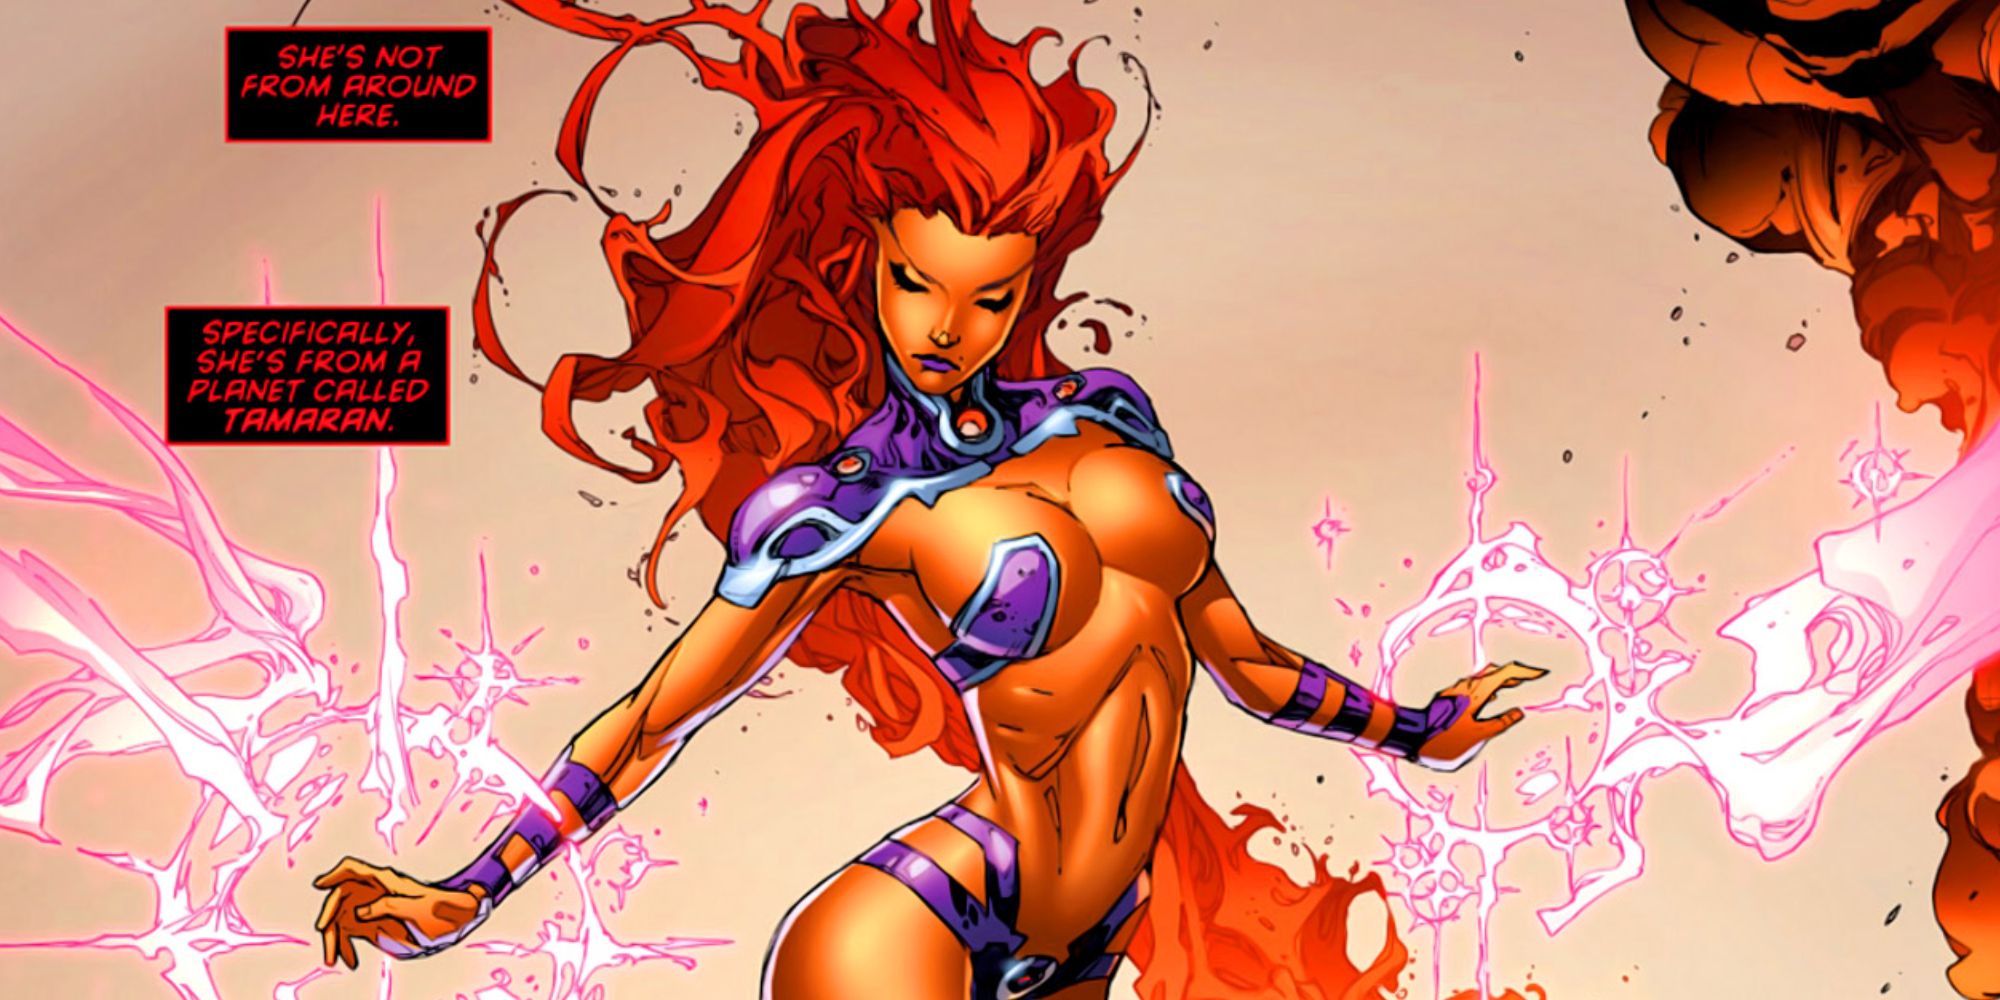 Starfire appears in DC Comics in her New 52 costume.